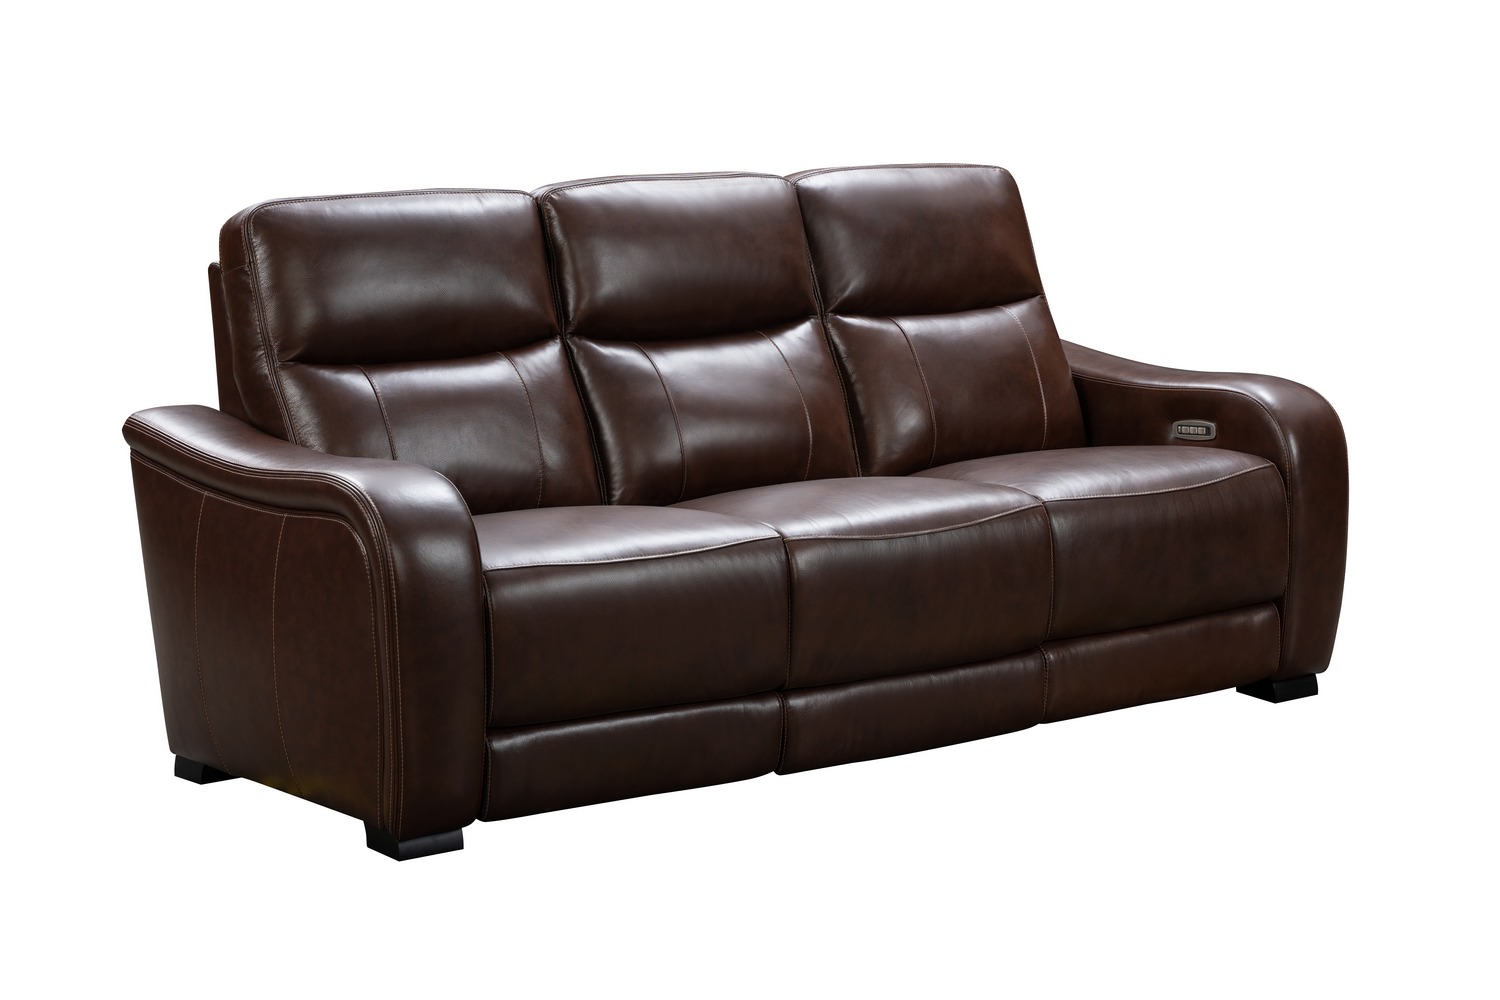 Barcalounger Electra Power Reclining Sofa with Power Head Rests and Power Lumbar - Castleton Rustic Brown/Leather Match